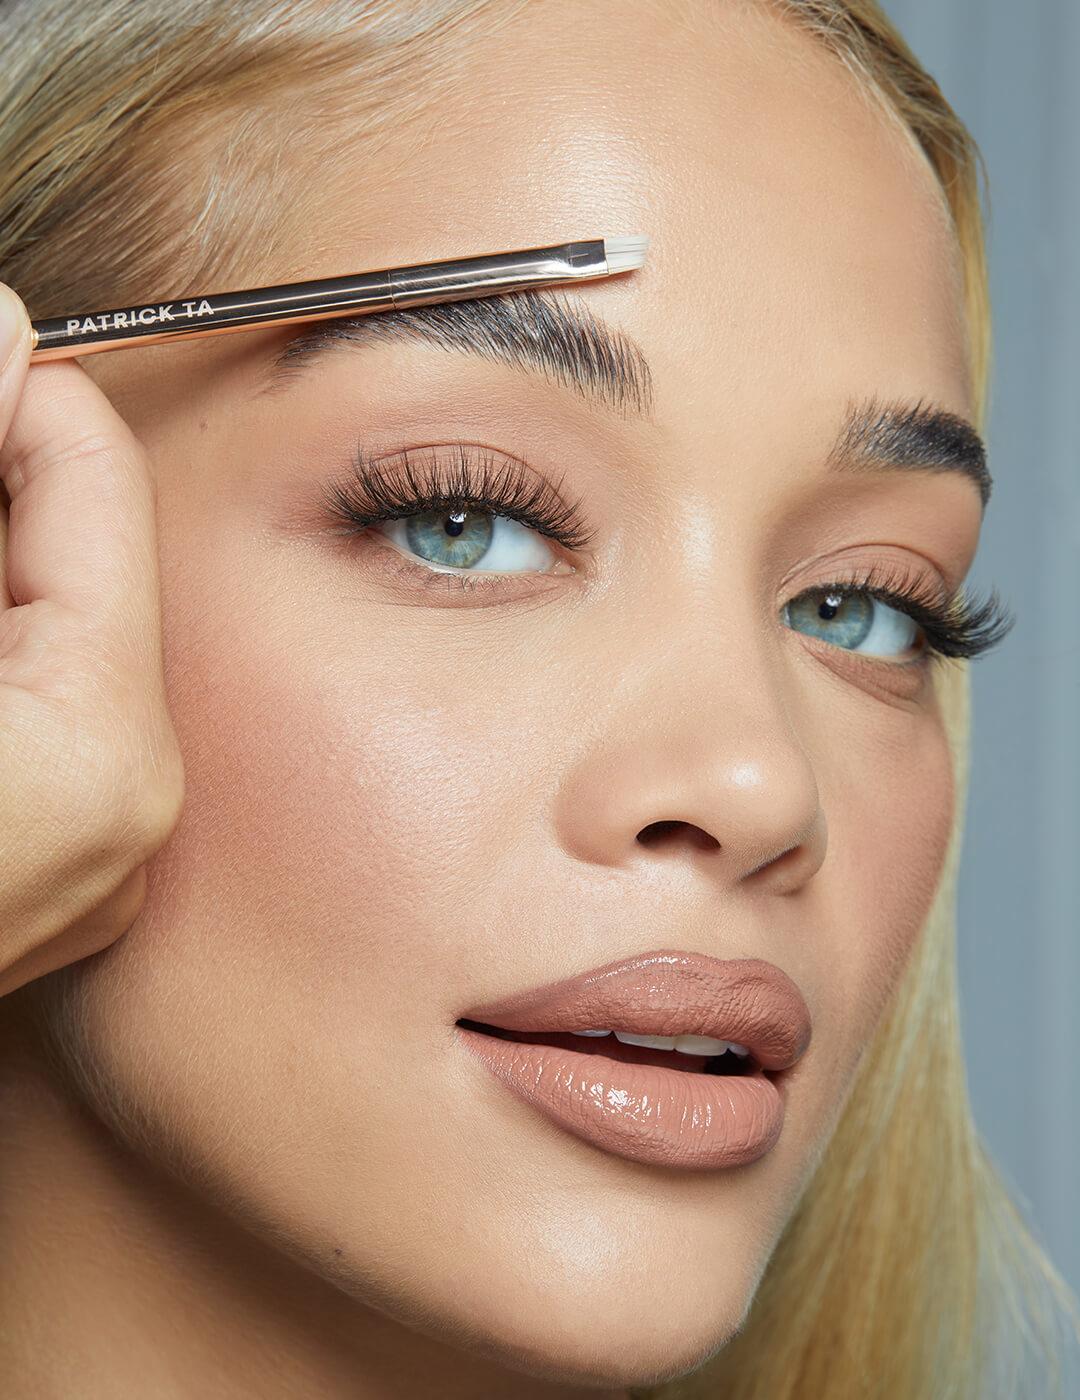 Close-up image of Jasmine Sanders with a neutral makeup look and a makeup brush touching her eyebrow